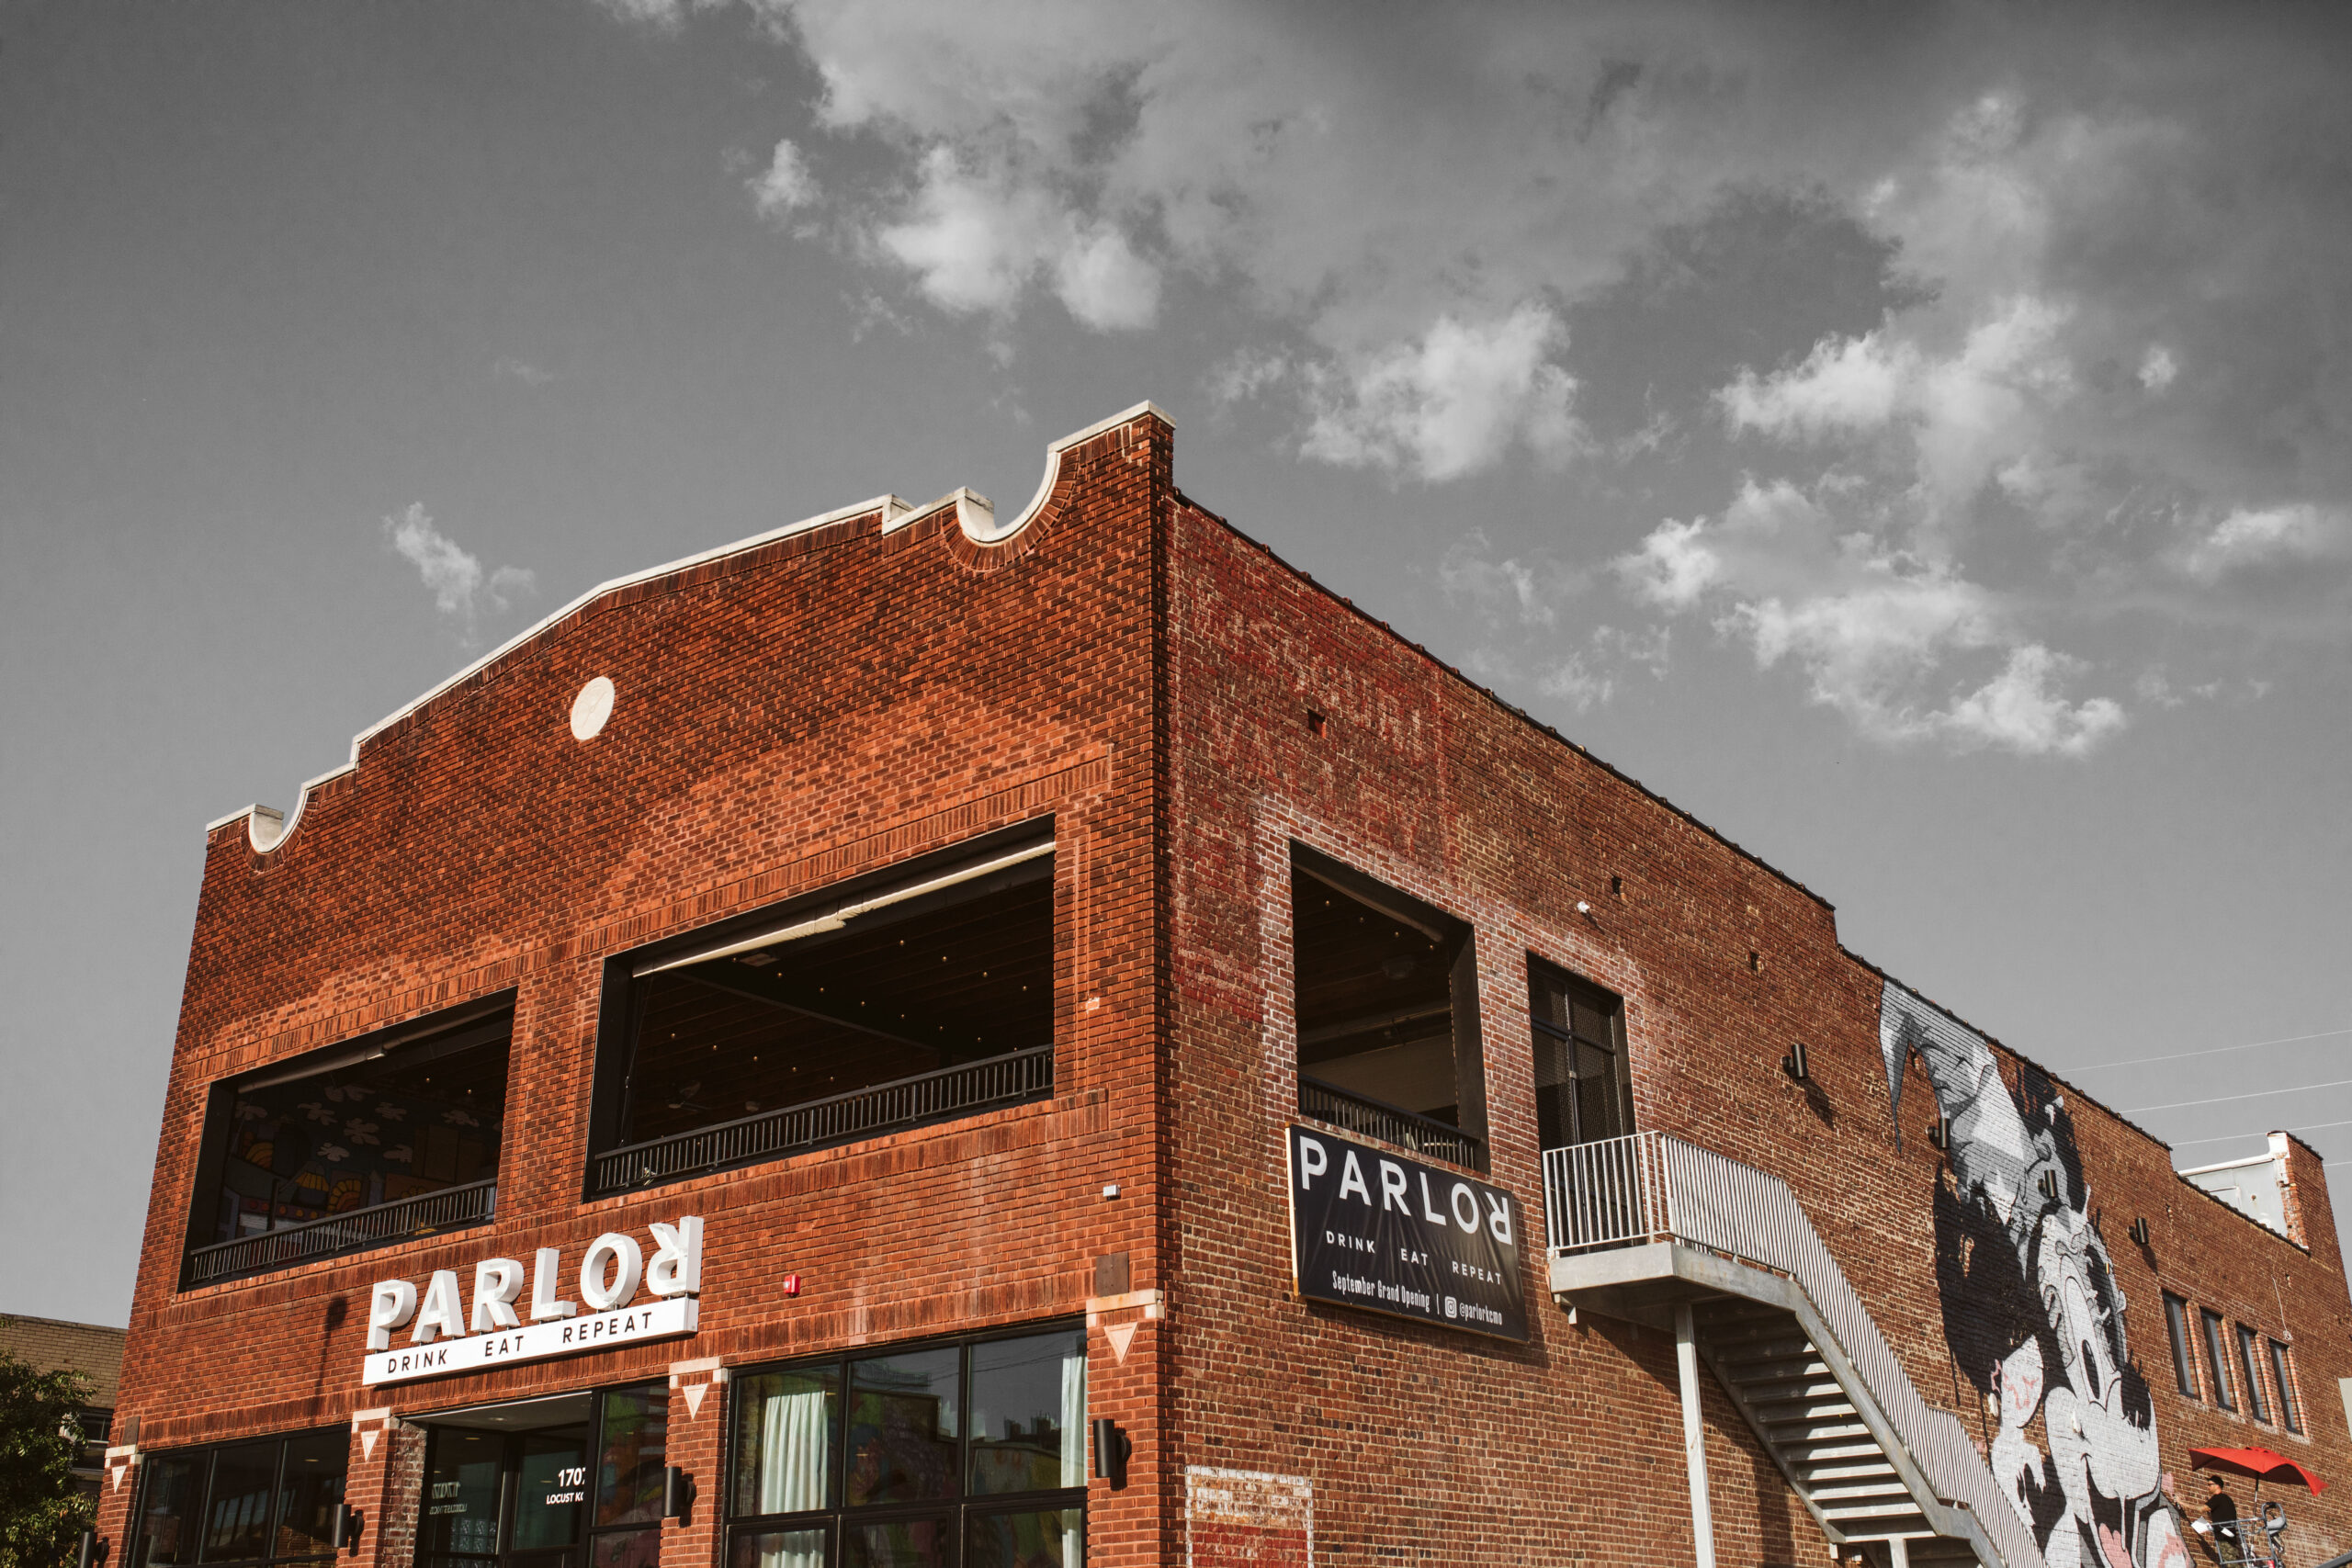 Parlor is taking over First Fridays! KC's best artists, makers, and vintage vendors! We've got live entertainment to start the night, and a DJ to finish it off! Come grab some cocktails and food and enjoy the night!